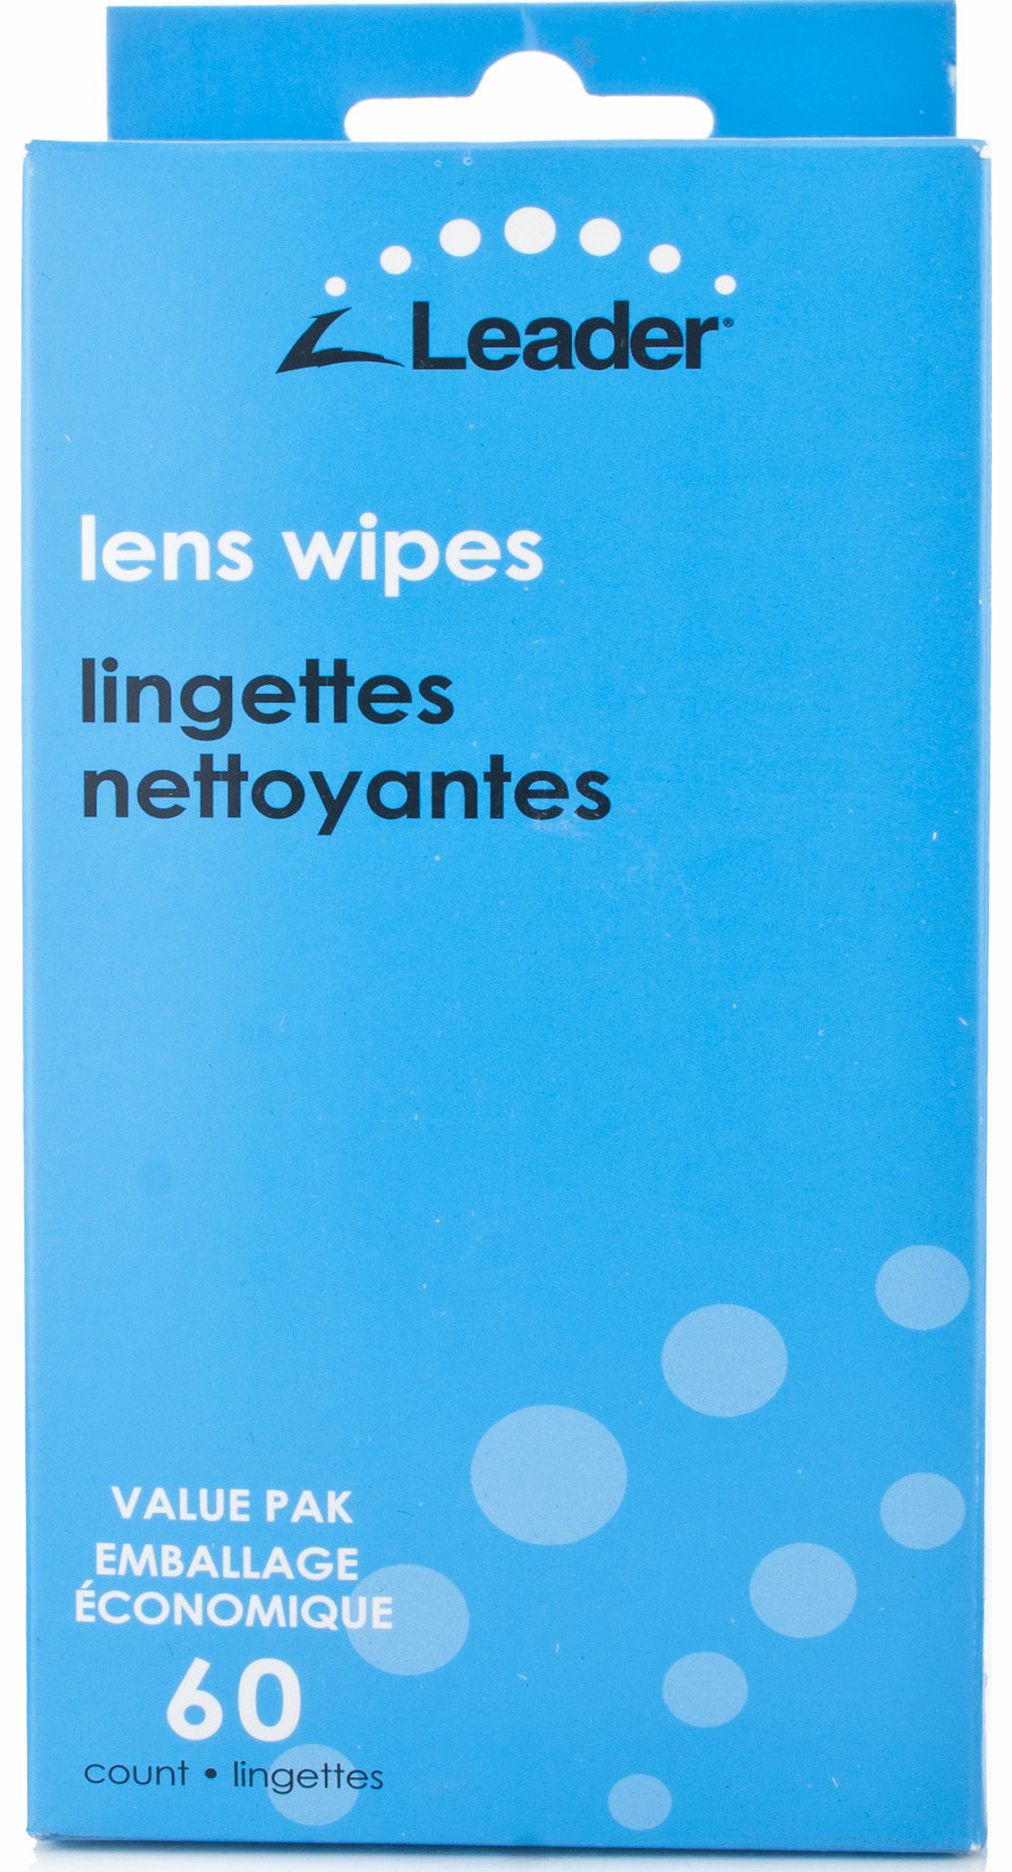 Leader Lens Wipes. These are Cleaning Towelettes by Leader have an anti-static and anti-fog formula that keeps safety glasses, goggles, face shields and computer screens clean and lint free. The Leader lens cleaning towelette box has a pull out tray 